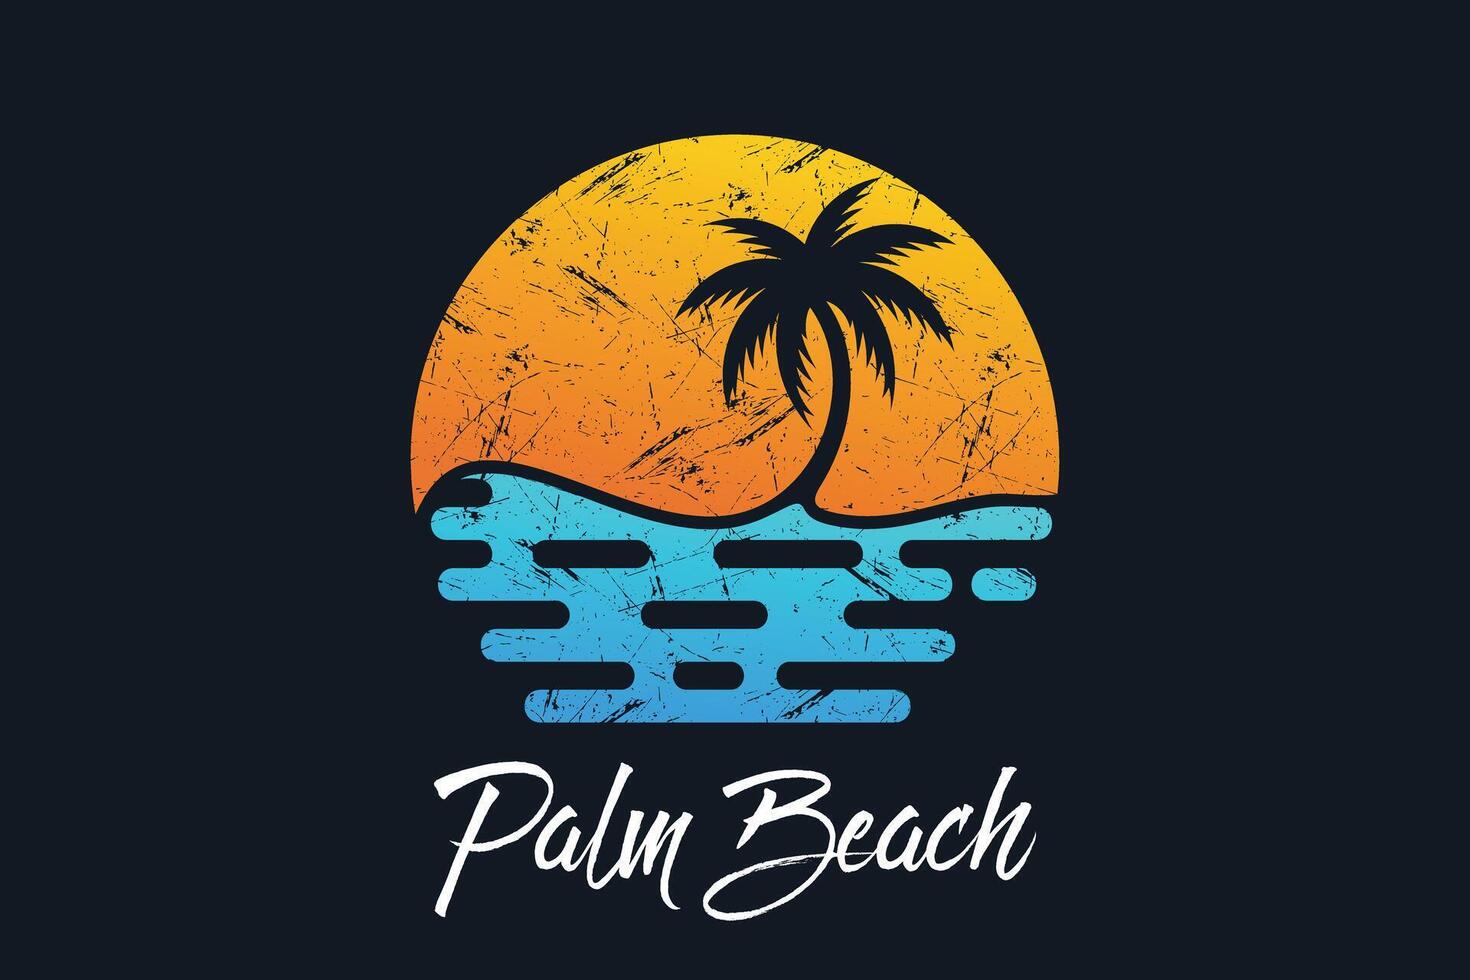 Beach scene with palm trees and the words creative concept vector